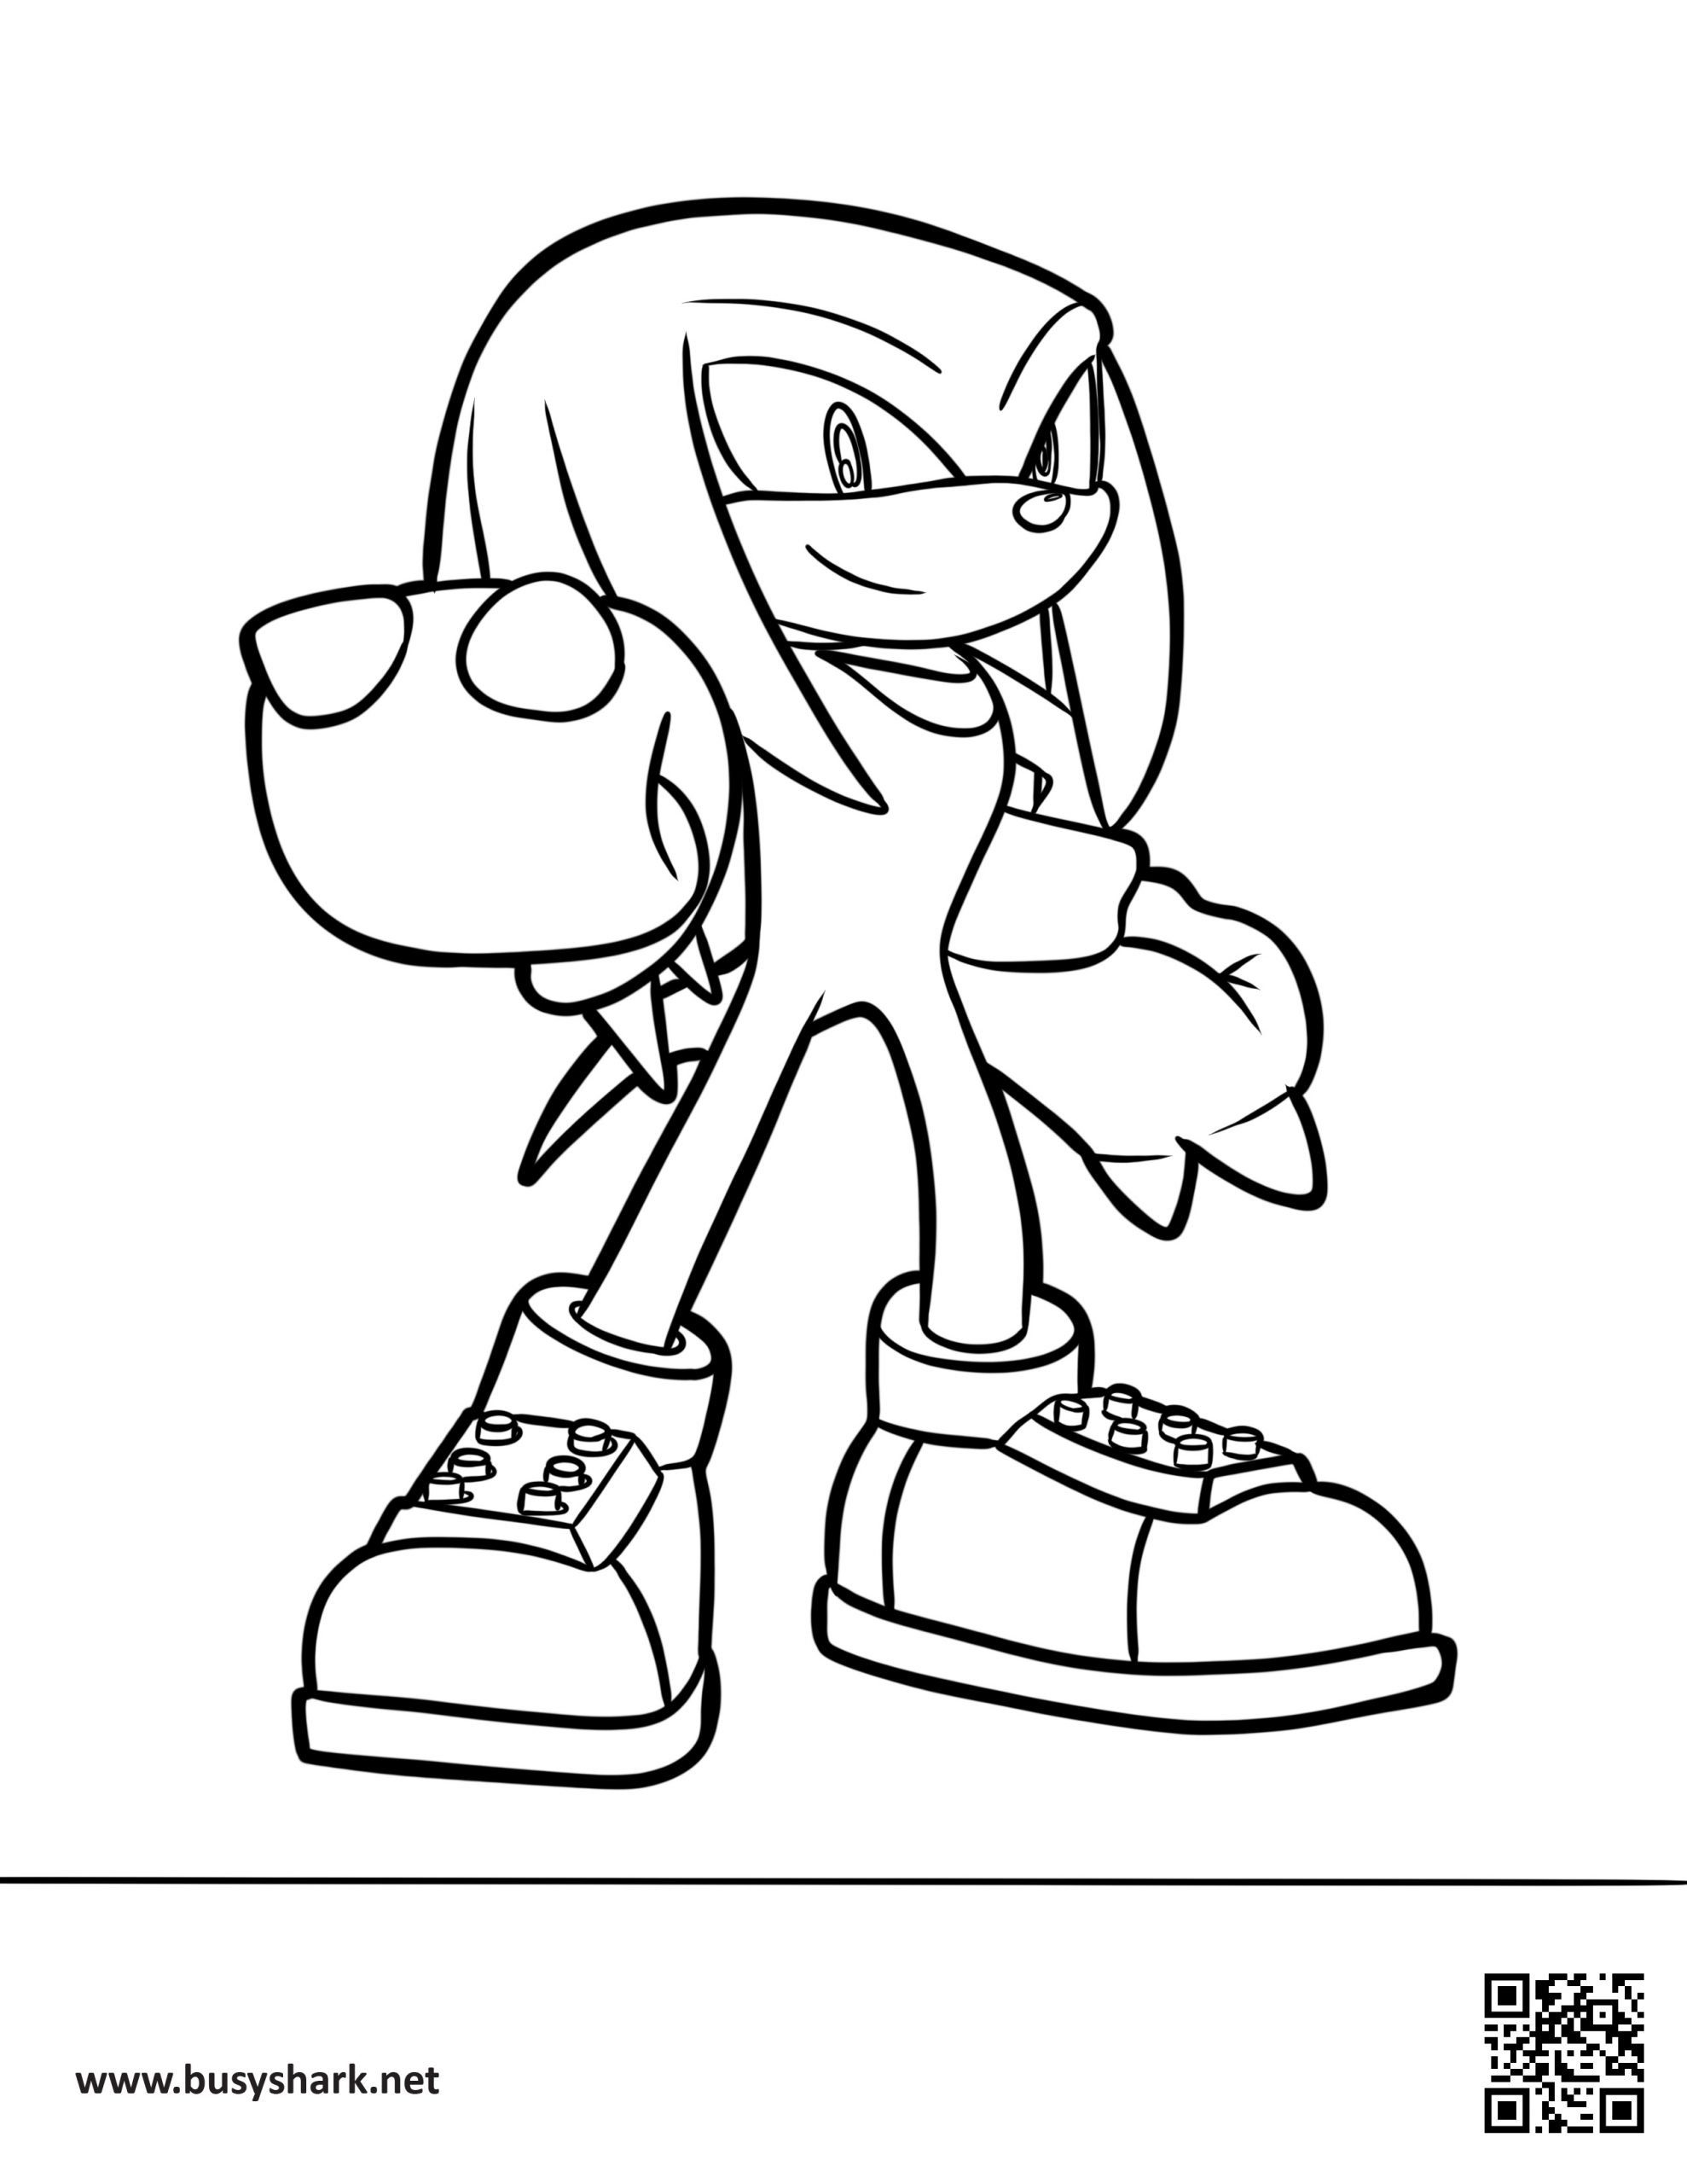 Knuckles the echidna coloring page free printable